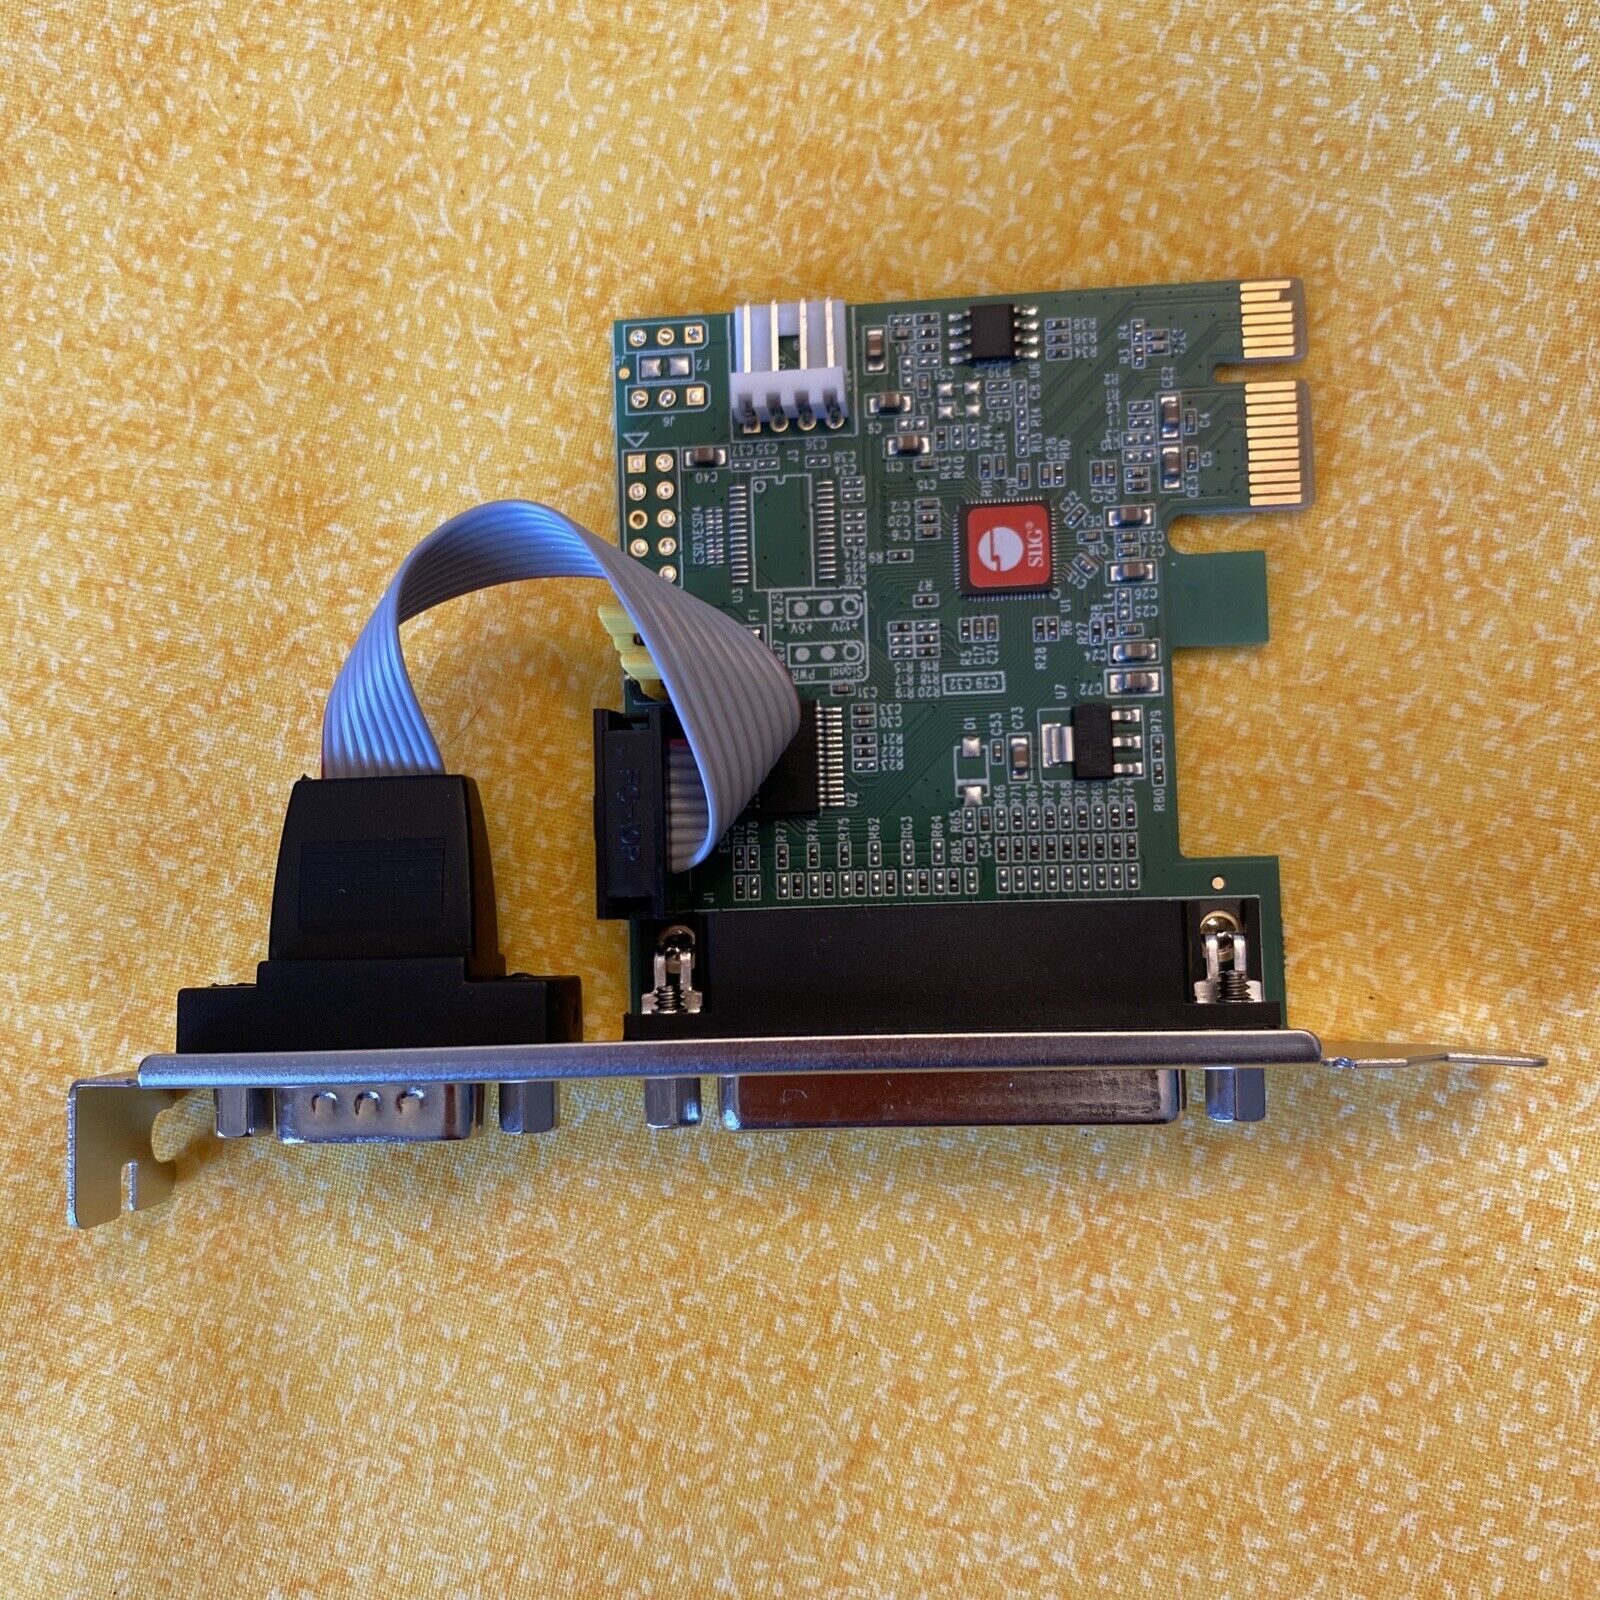 SIIG DP CyberParallel Dual PCIe Serial Adapter Card, ECP/EPP (JJ-E02211-S1)